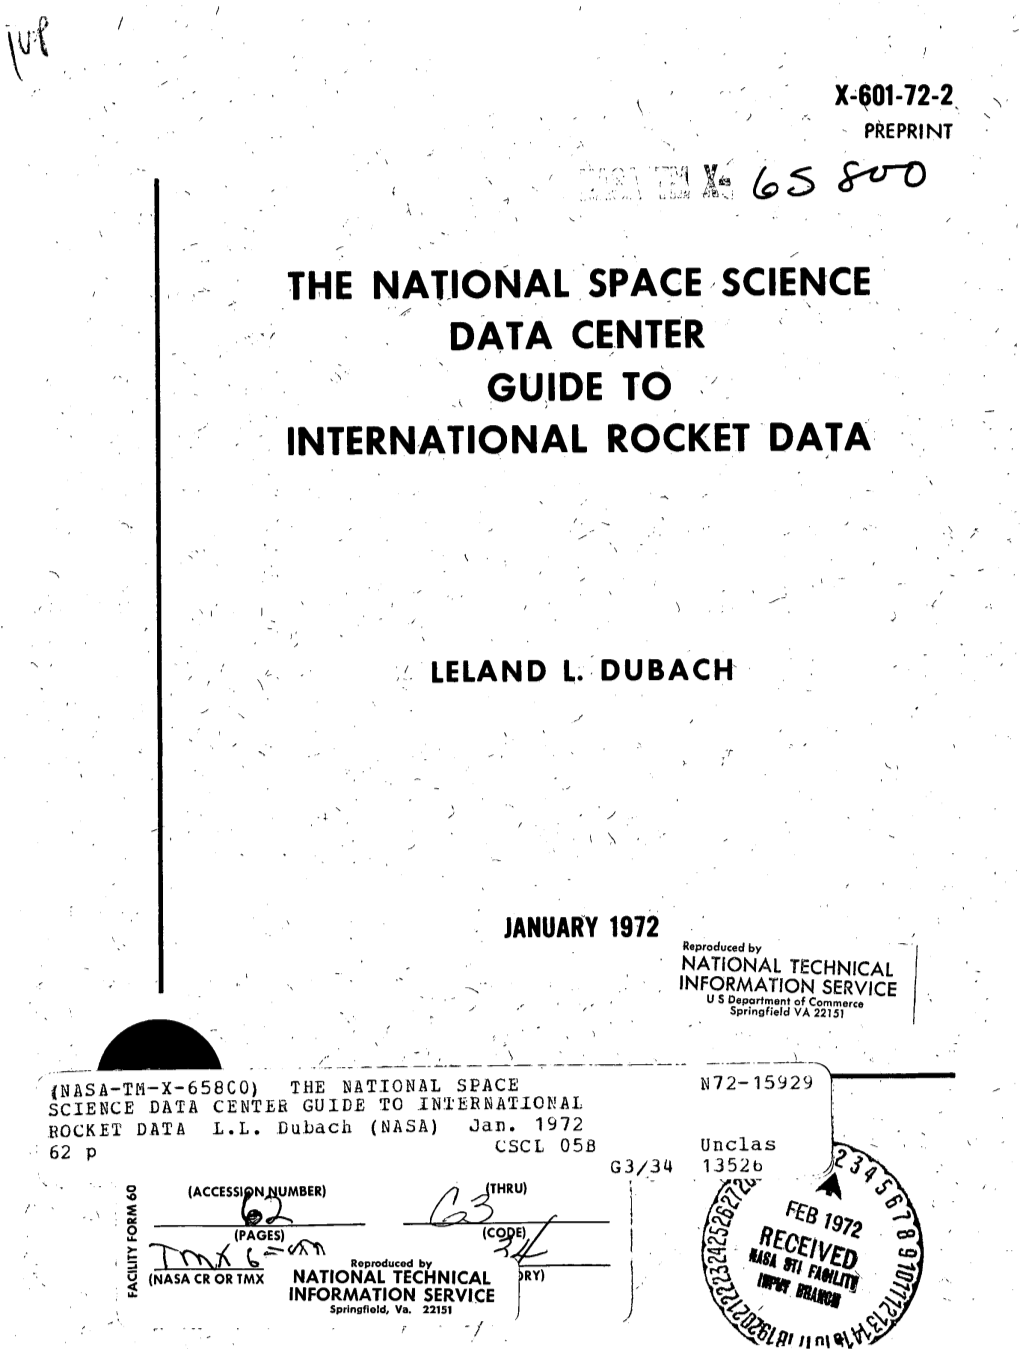 The National Space Science Data Center Guide to International Rocket Data